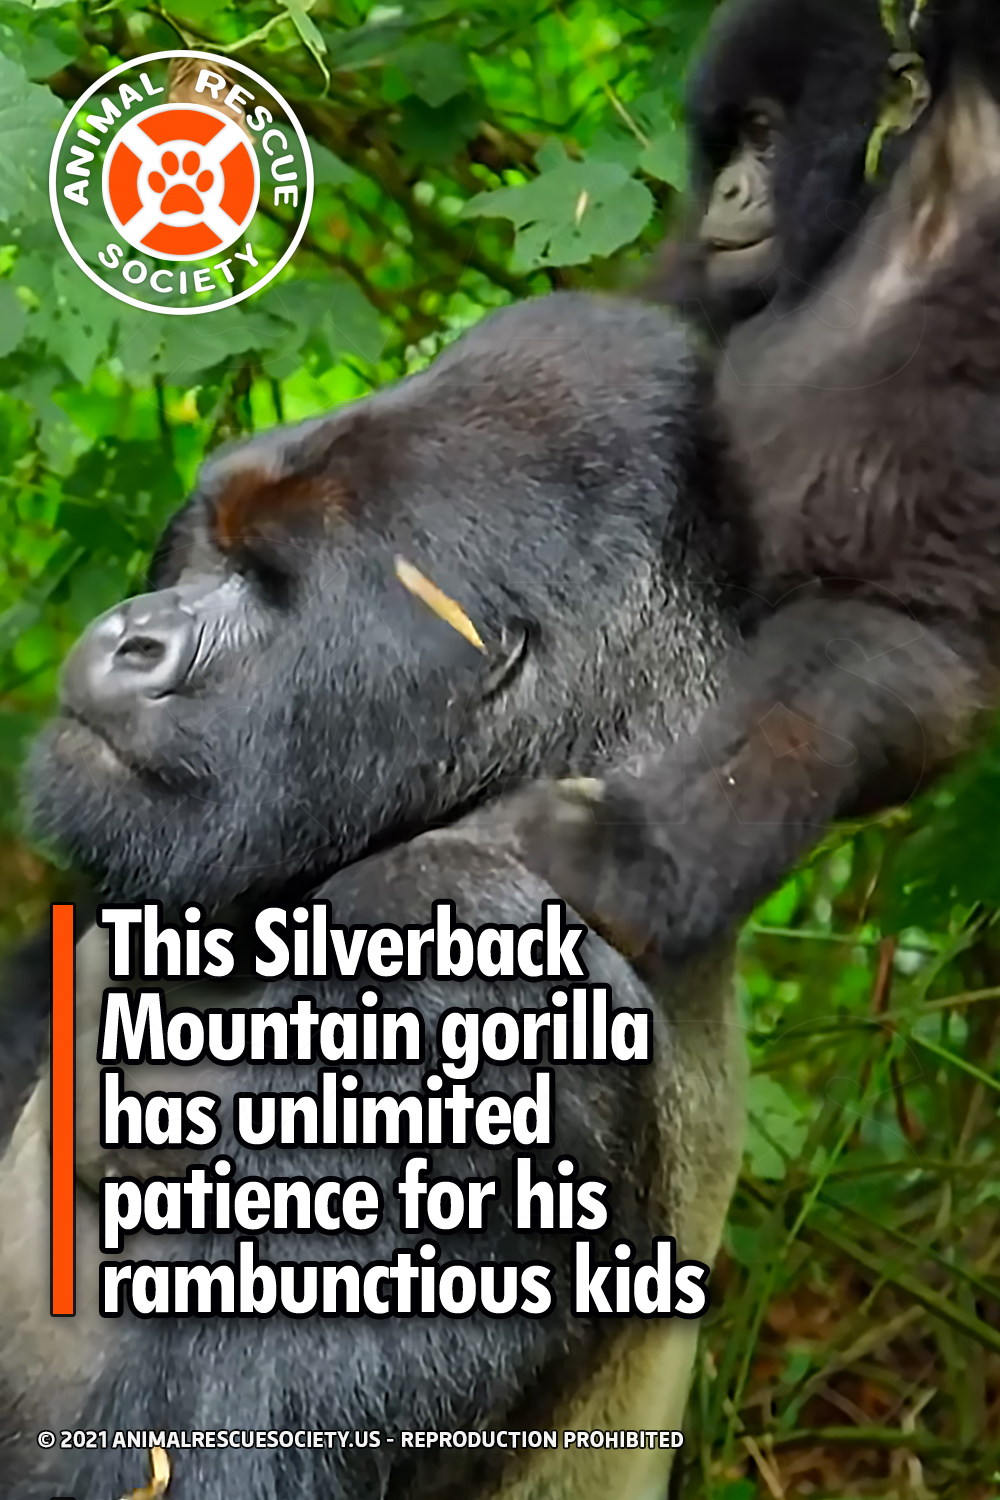 This Silverback Mountain gorilla has unlimited patience for his rambunctious kids